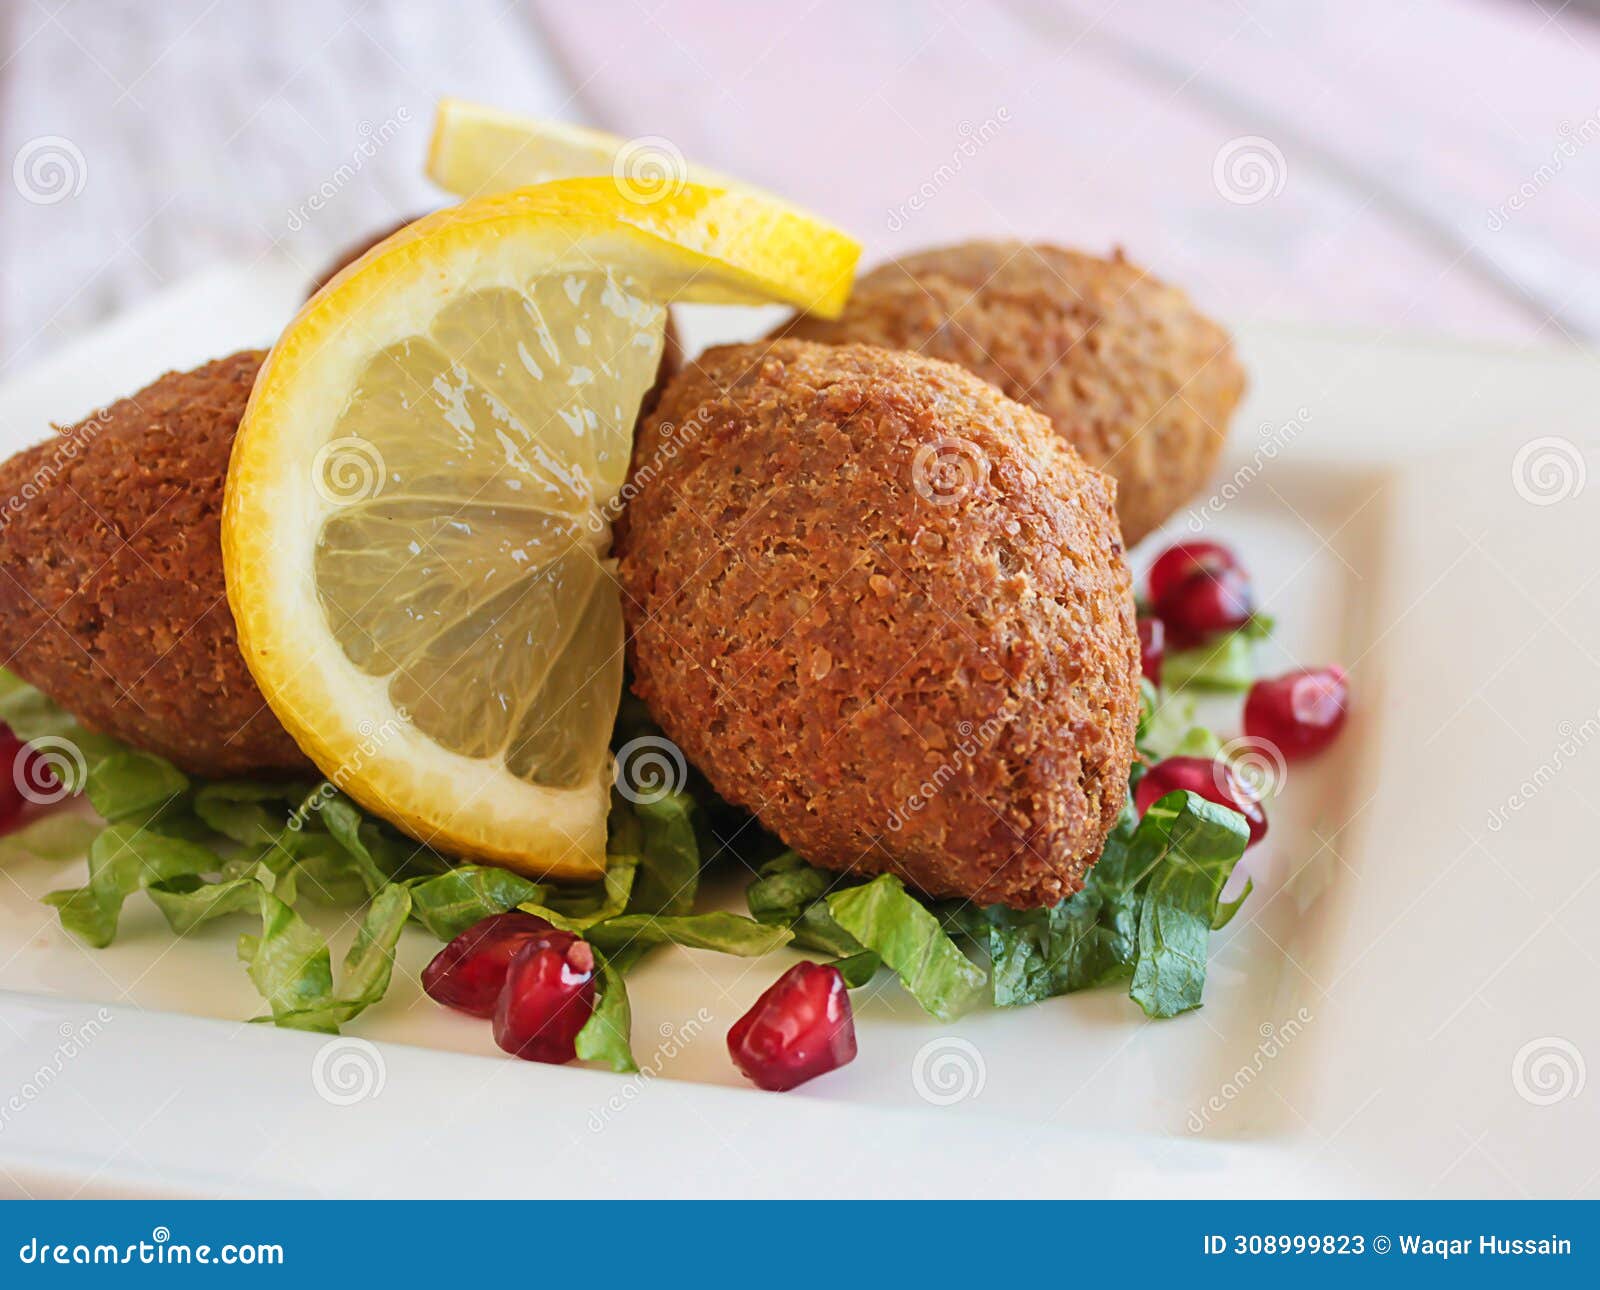 kebbah, kibbeh, kibbe or kubbeh with lemon slice and pomegranate seeds closeup served in dish  on table side view of